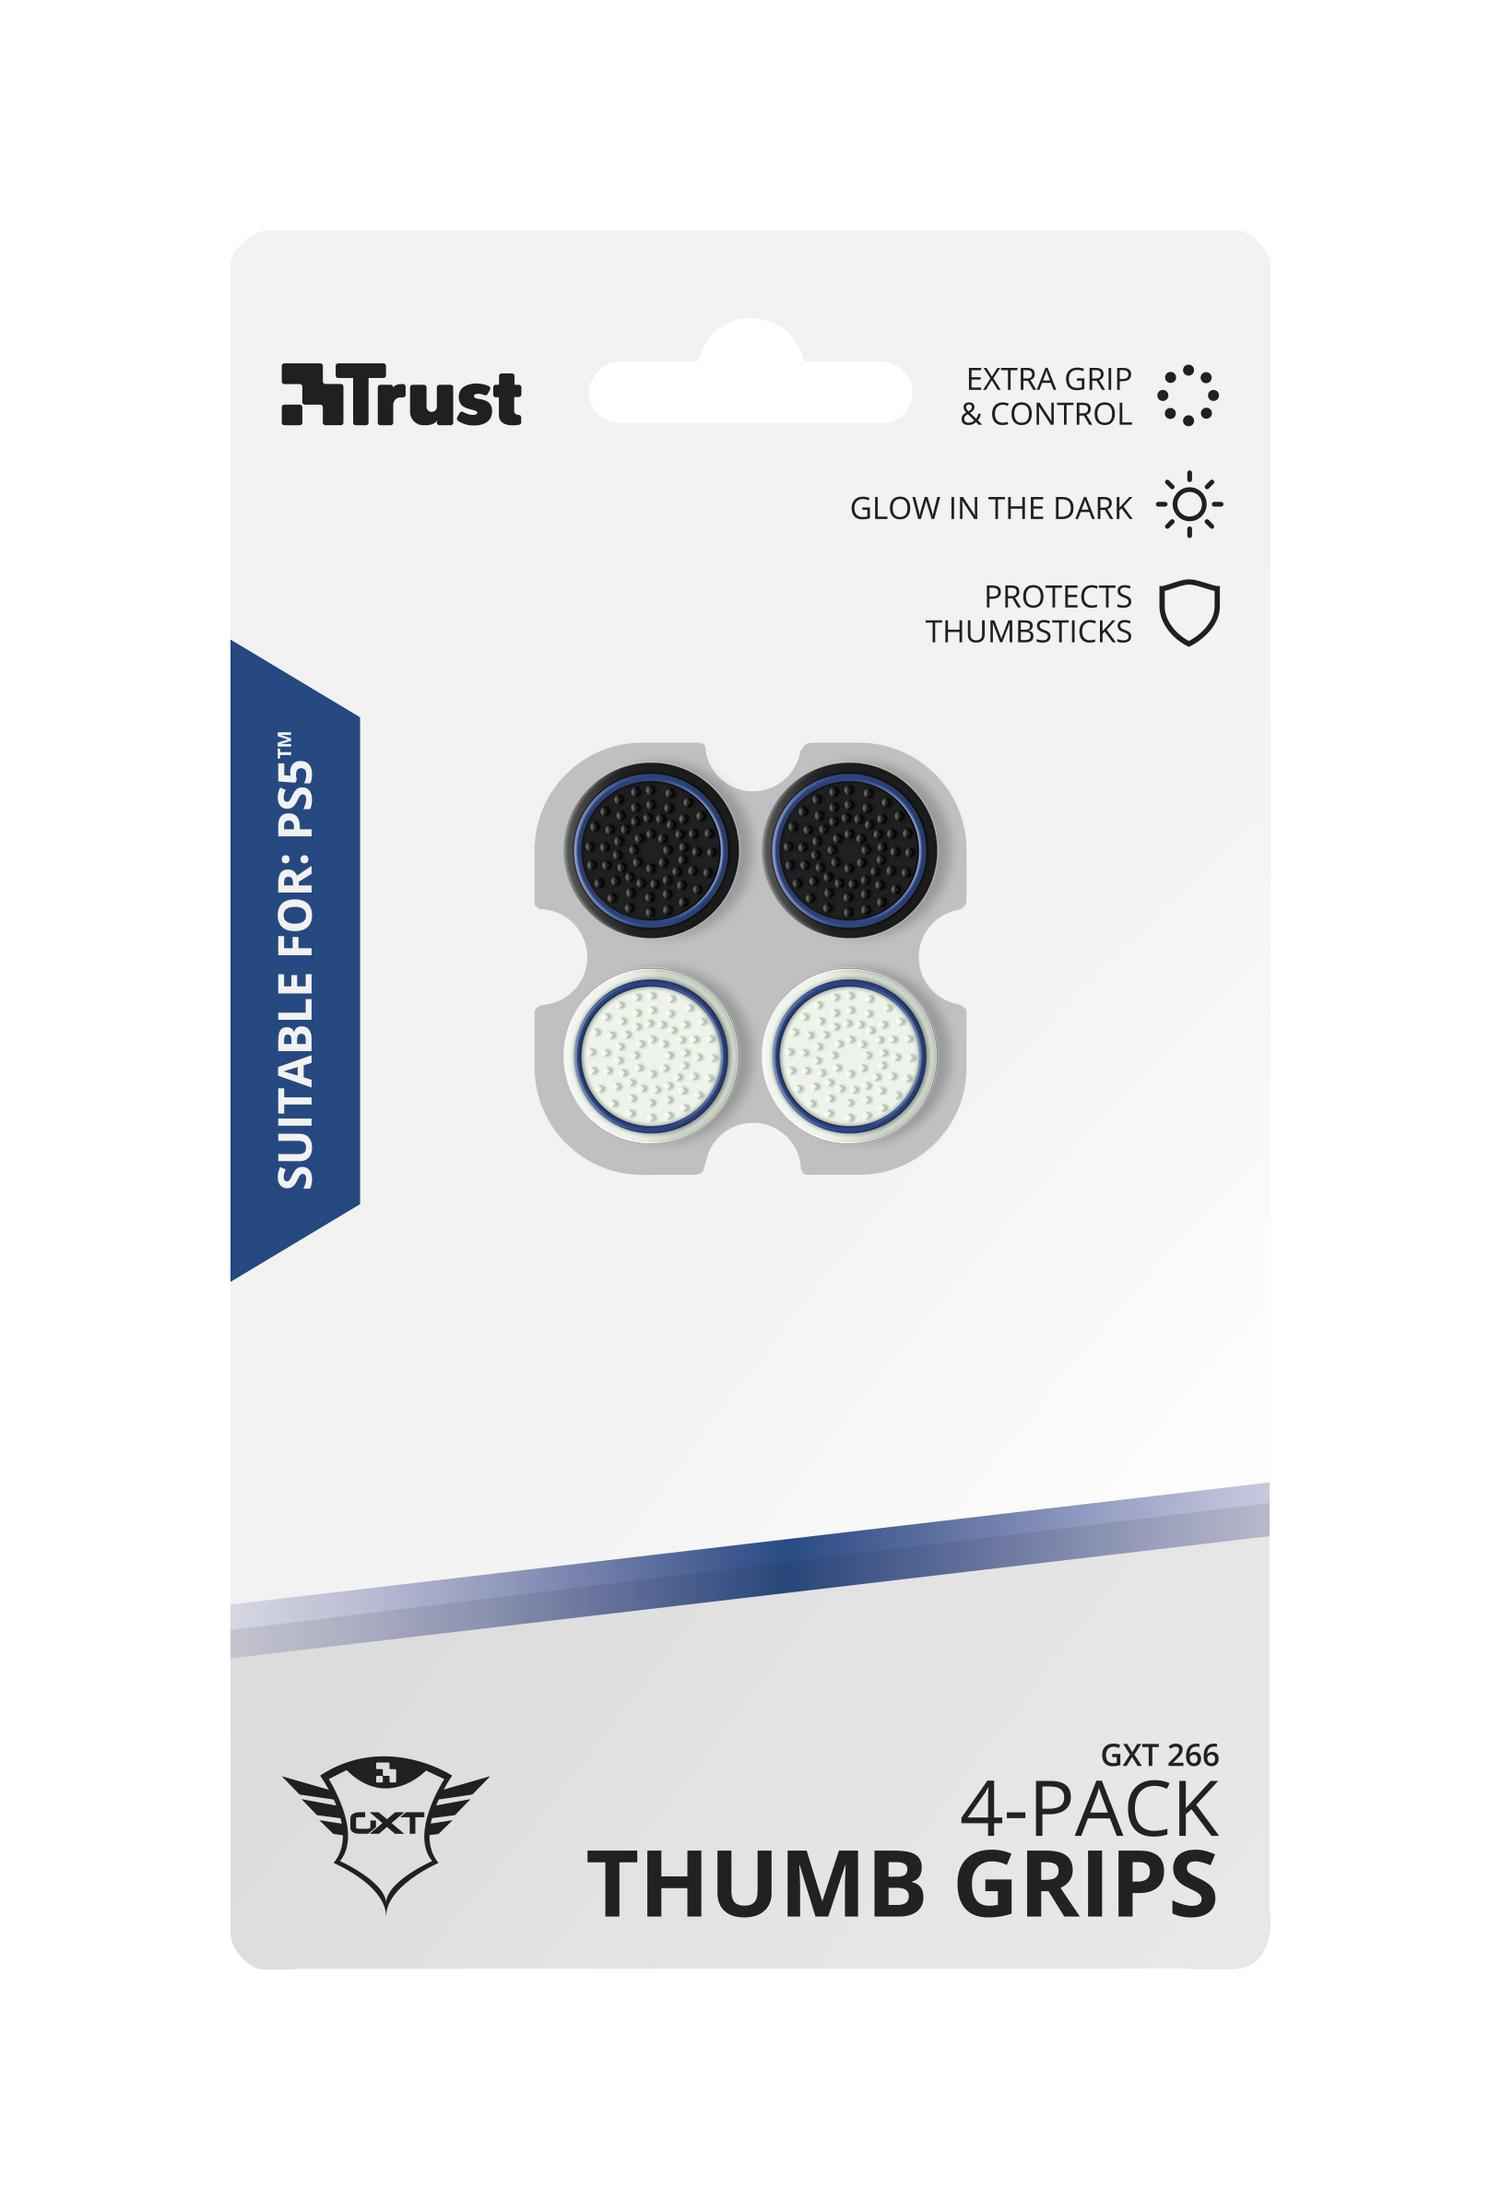 TRUST 24170 Schwarz THUMB FOR PS5, GXT Grips, 266 Thumb 4-PACK GRIPS